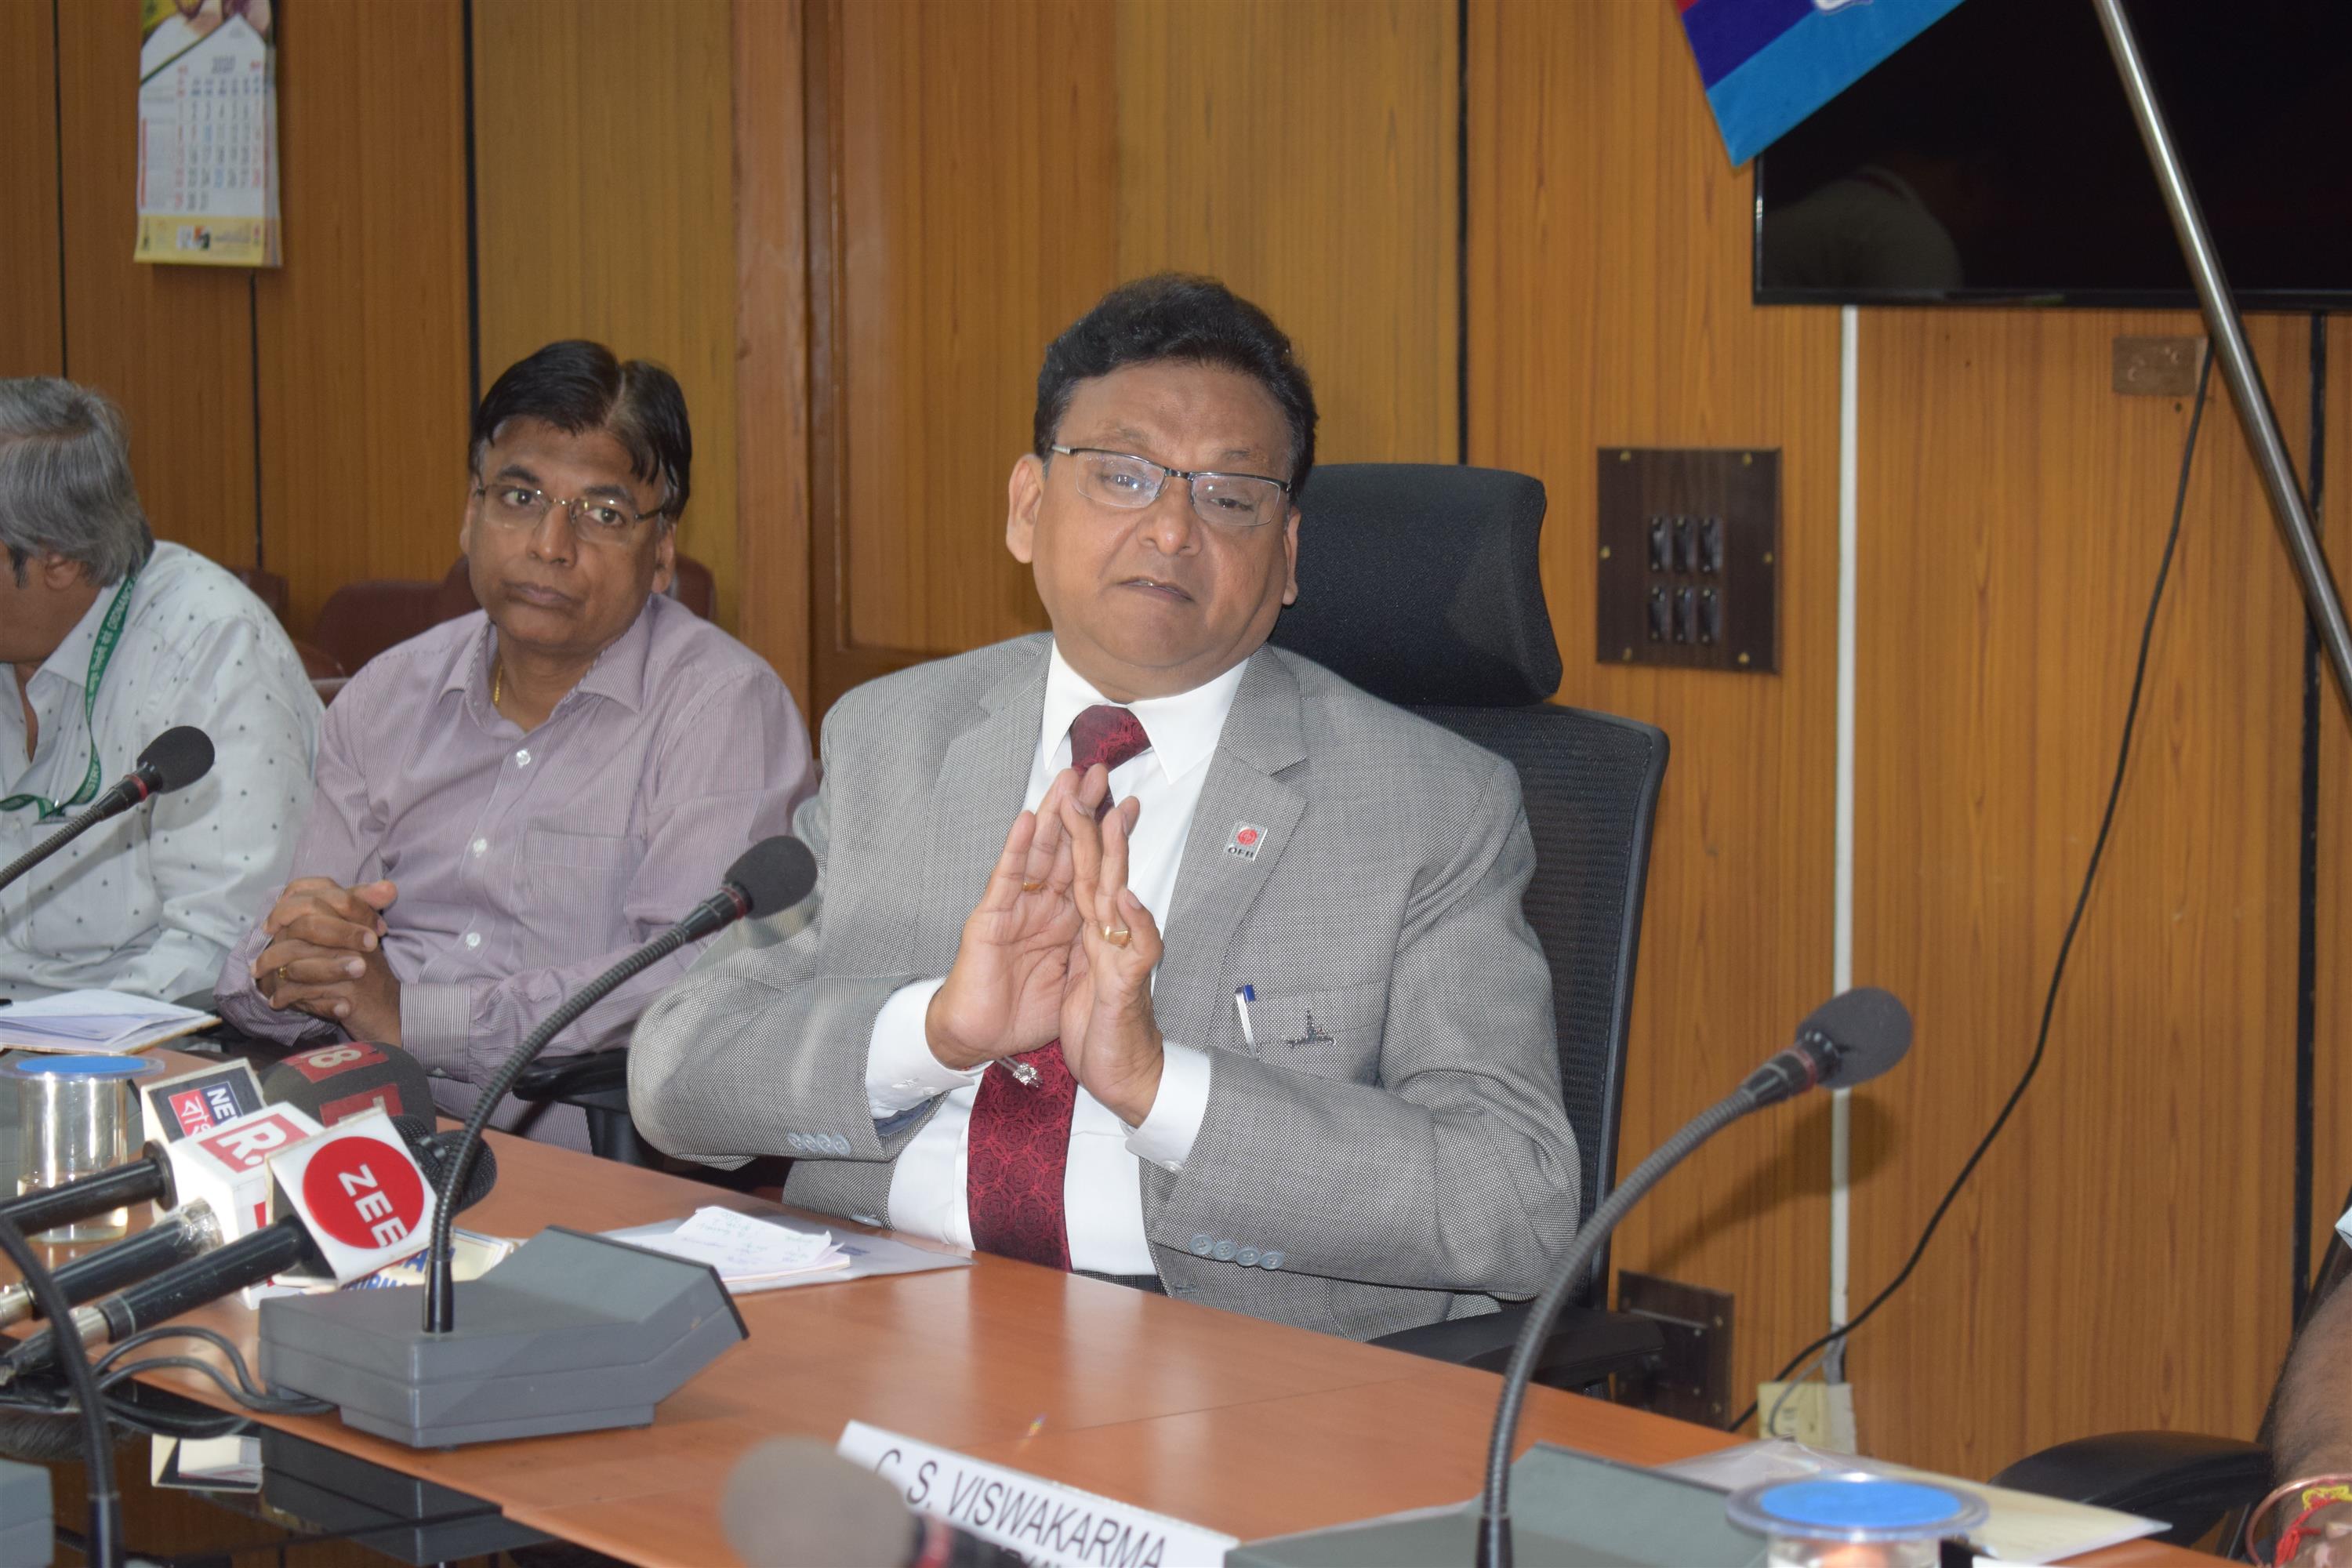 Shri Hari Mohan, Director General of Ordnance Factories and Chairman of Ordnance Factory Board holds a press conference at the Ordnance Factory Board office in Kolkata, 17.03.2020.